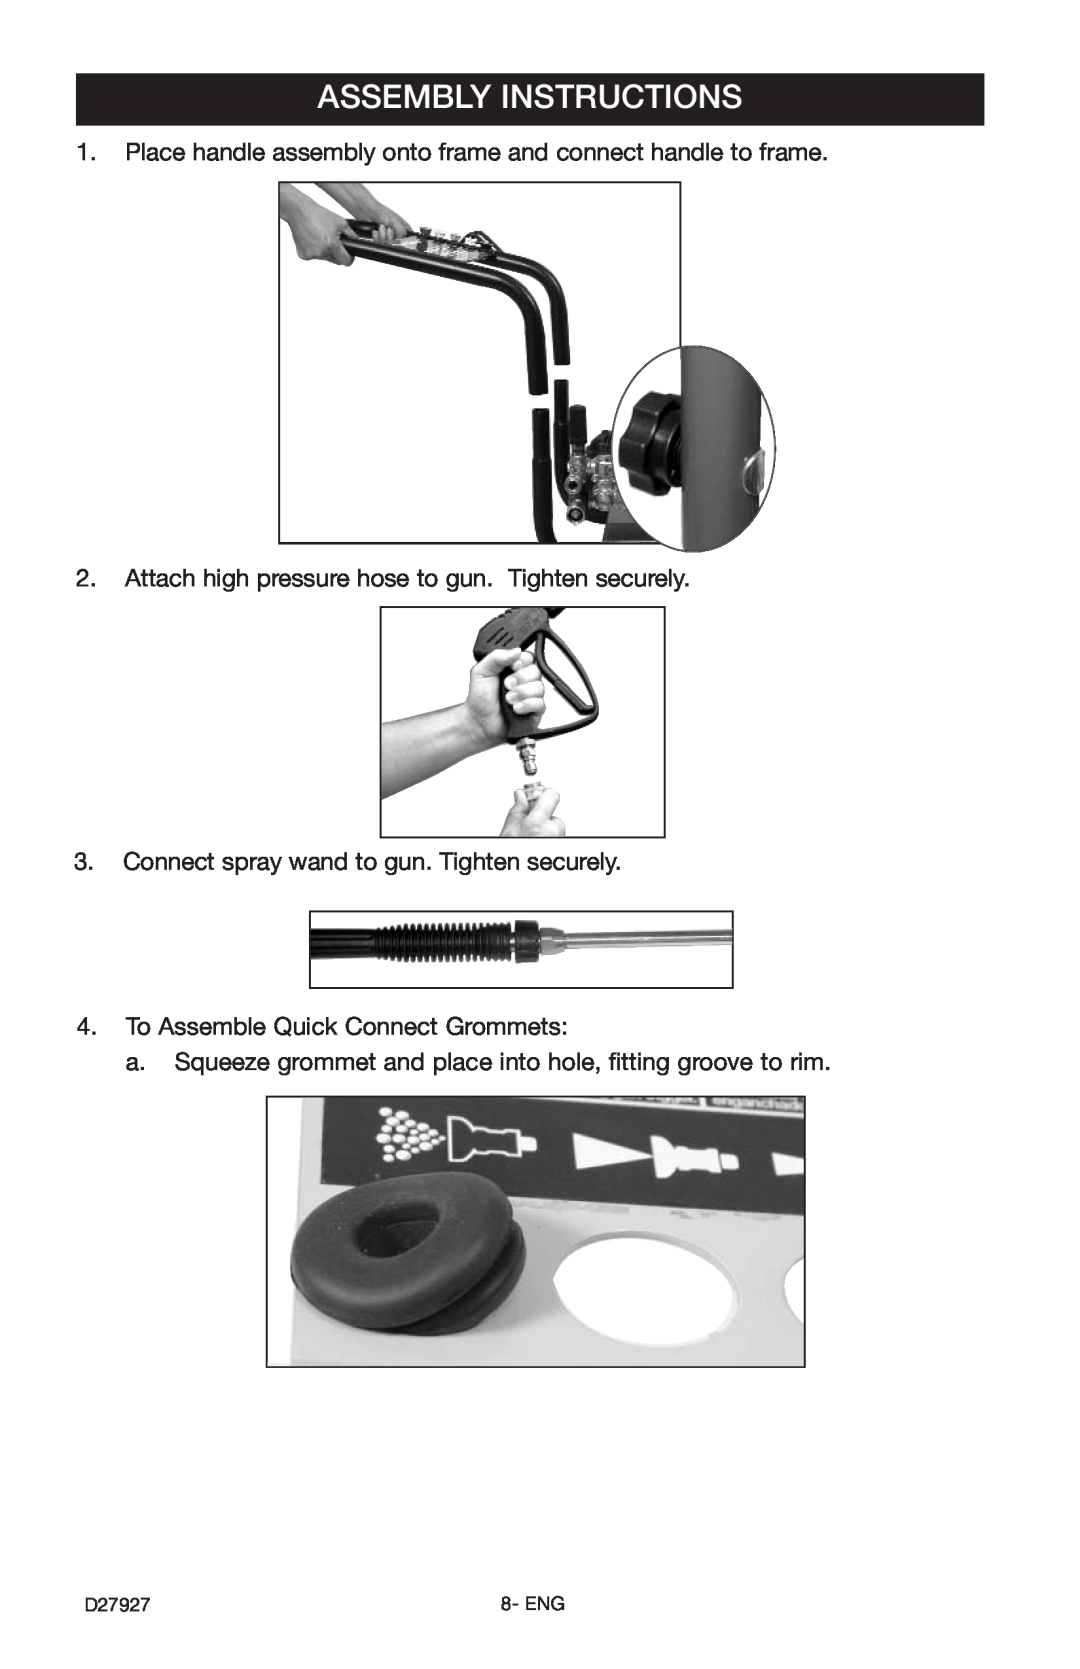 Porter-Cable PCK3030SP Assembly Instructions, Place handle assembly onto frame and connect handle to frame, D27927, Eng 